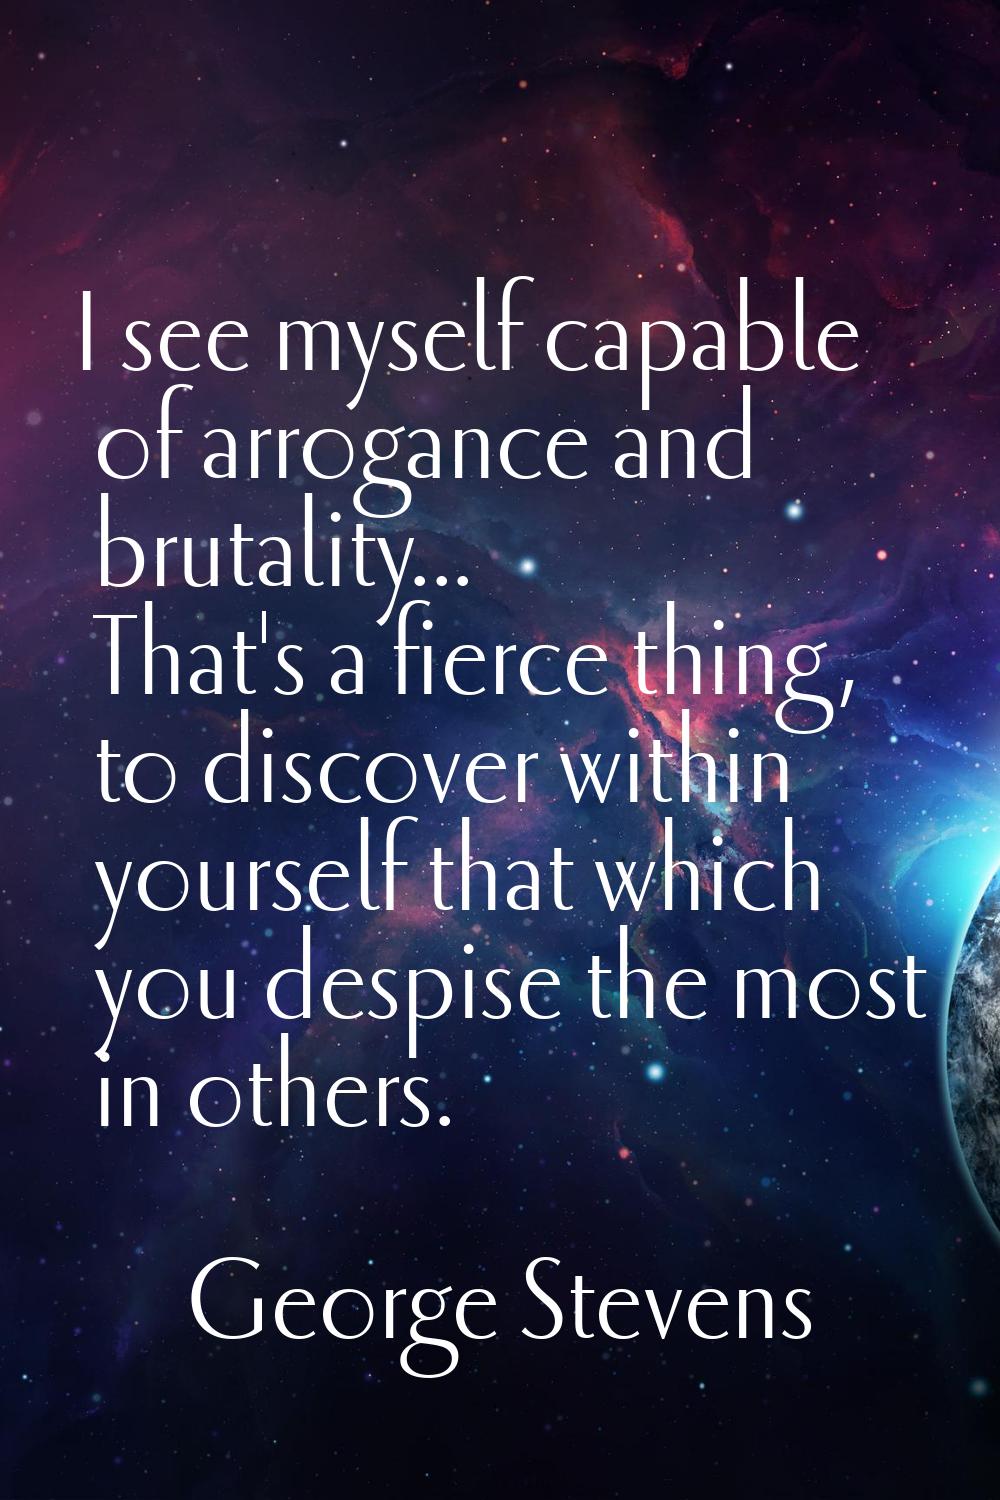 I see myself capable of arrogance and brutality... That's a fierce thing, to discover within yourse